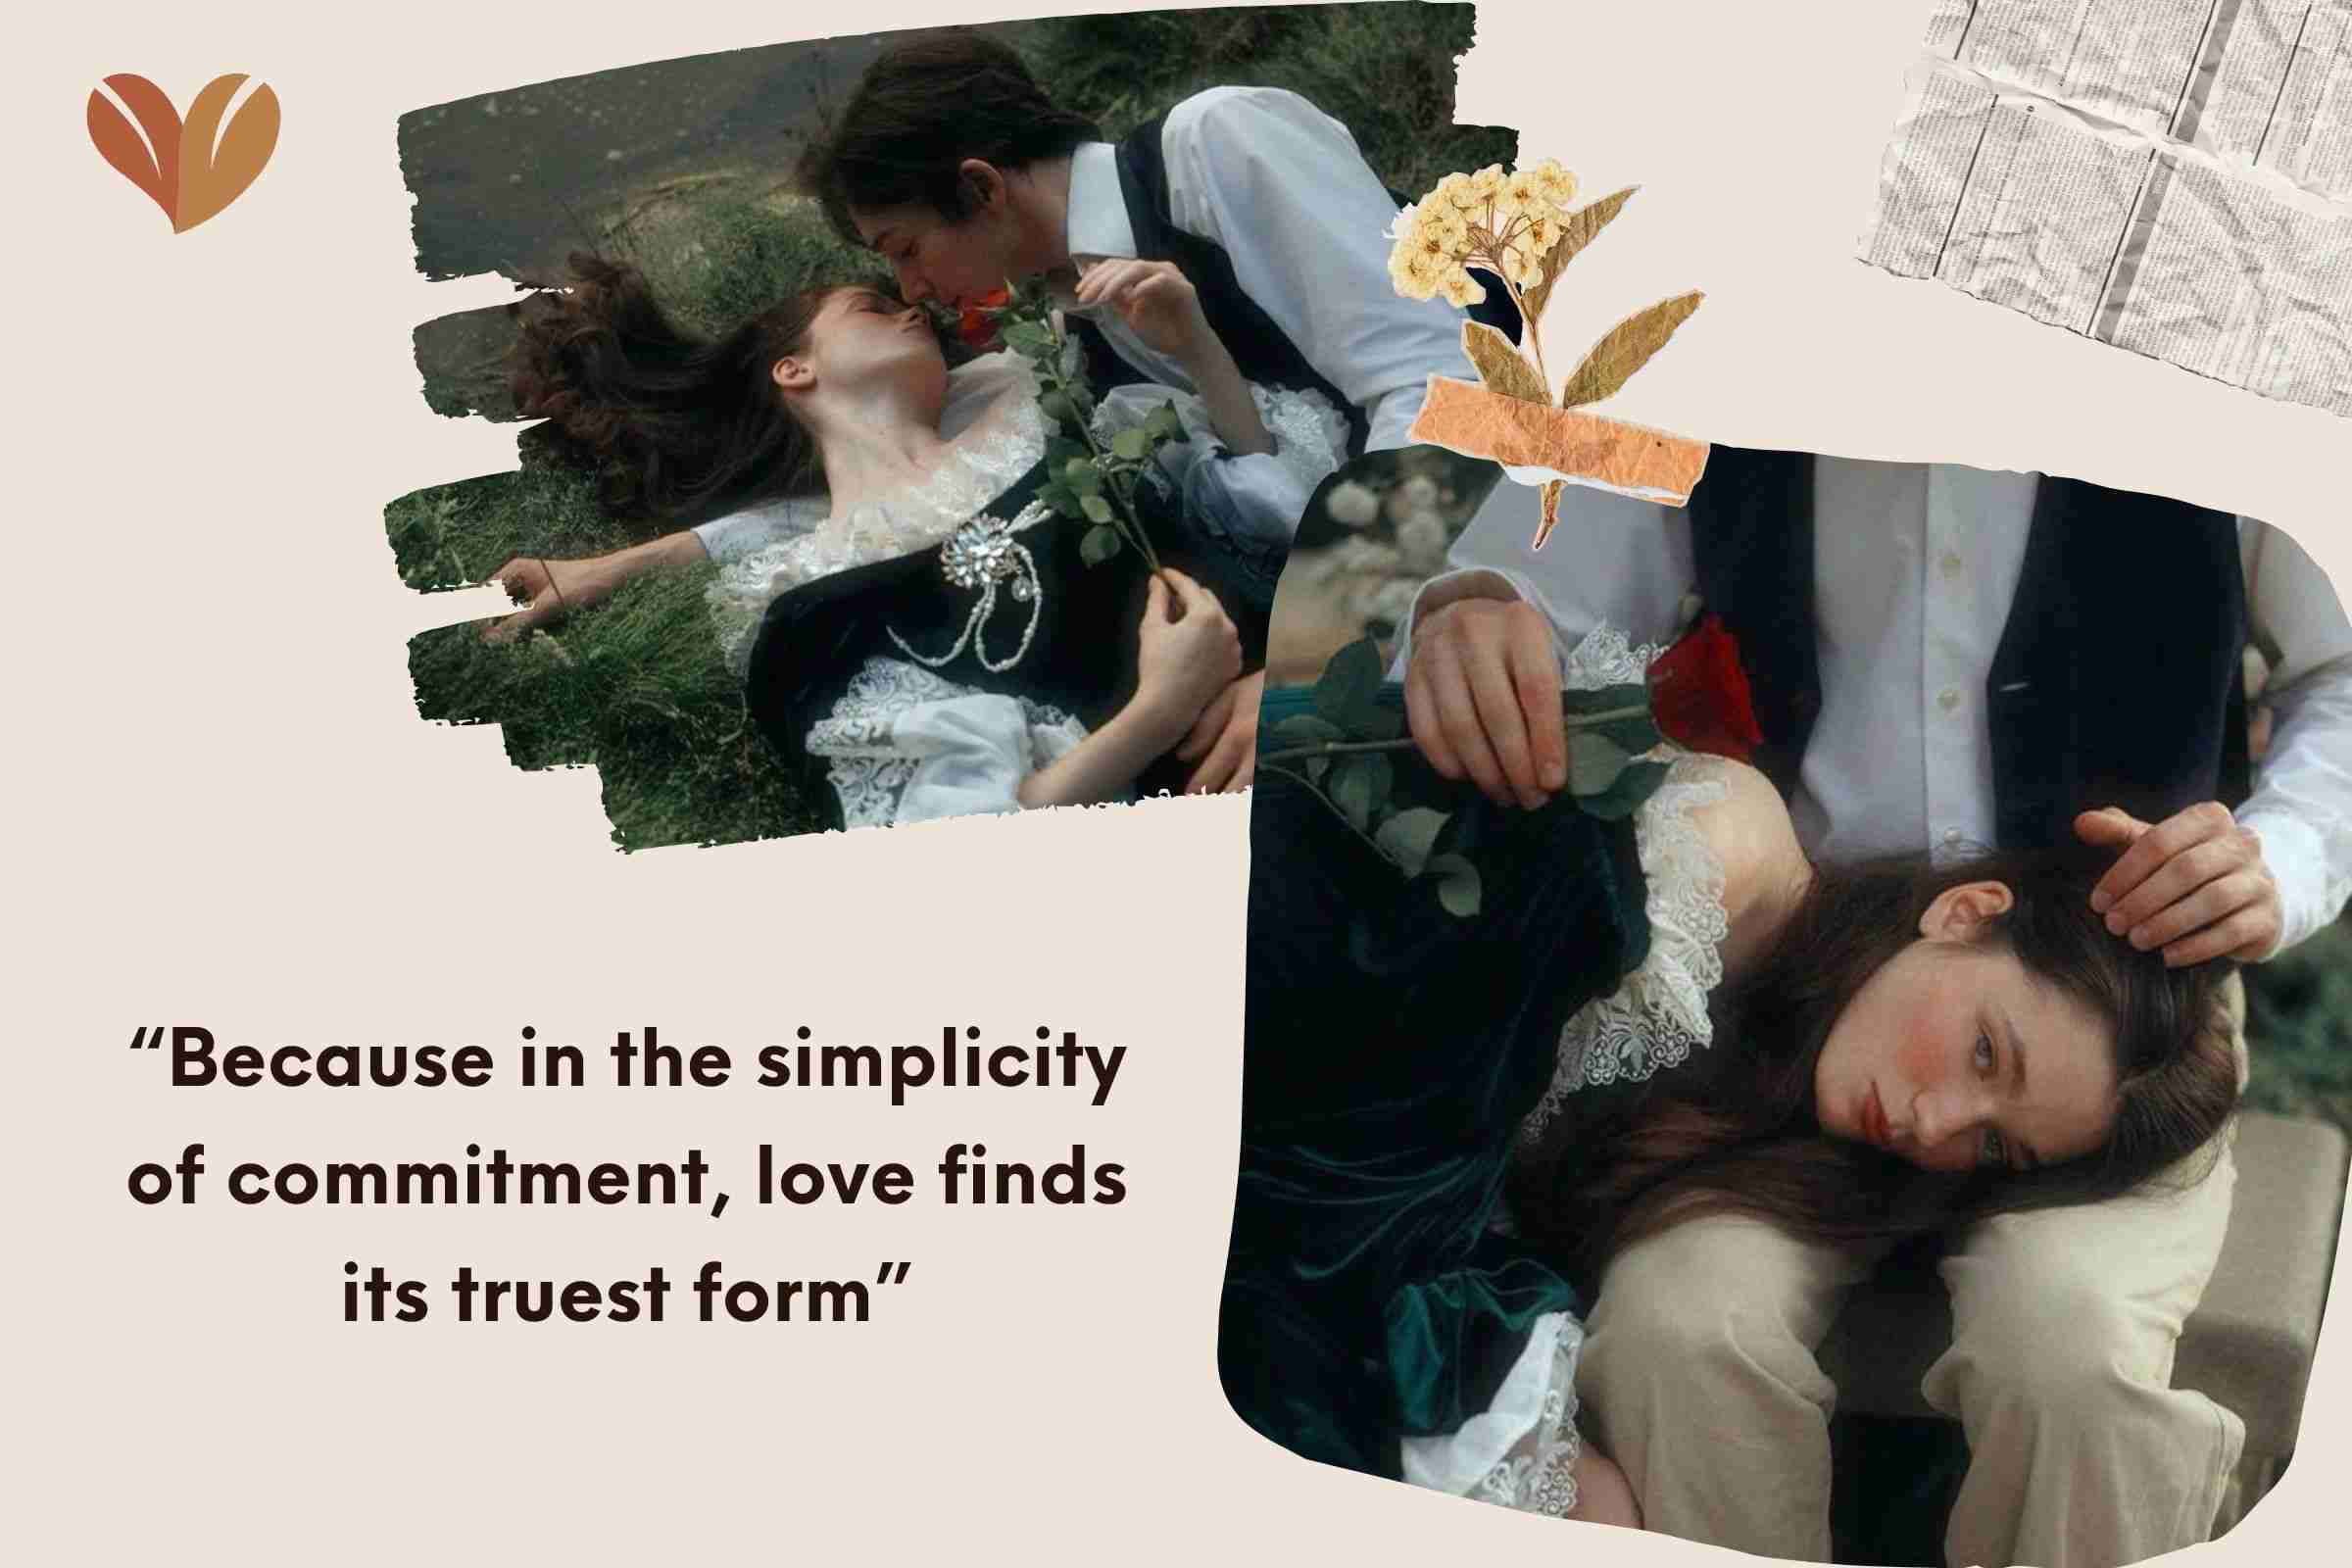 “Because in the simplicity of commitment, love finds its truest form”